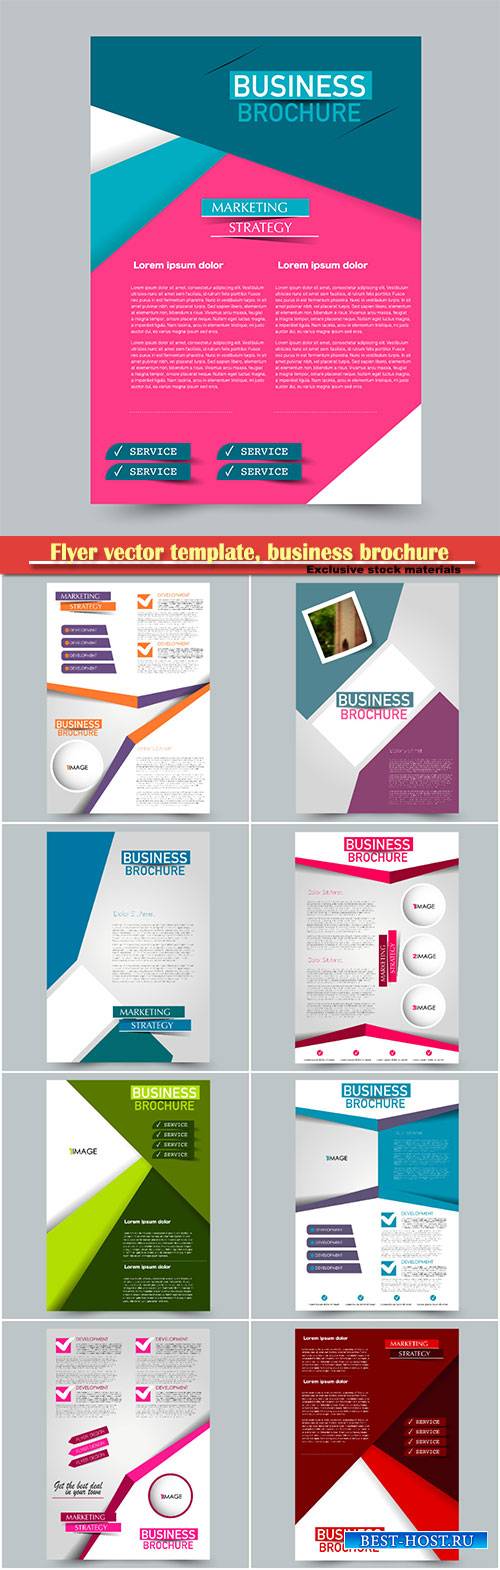 Flyer vector template, business brochure, magazine cover # 35